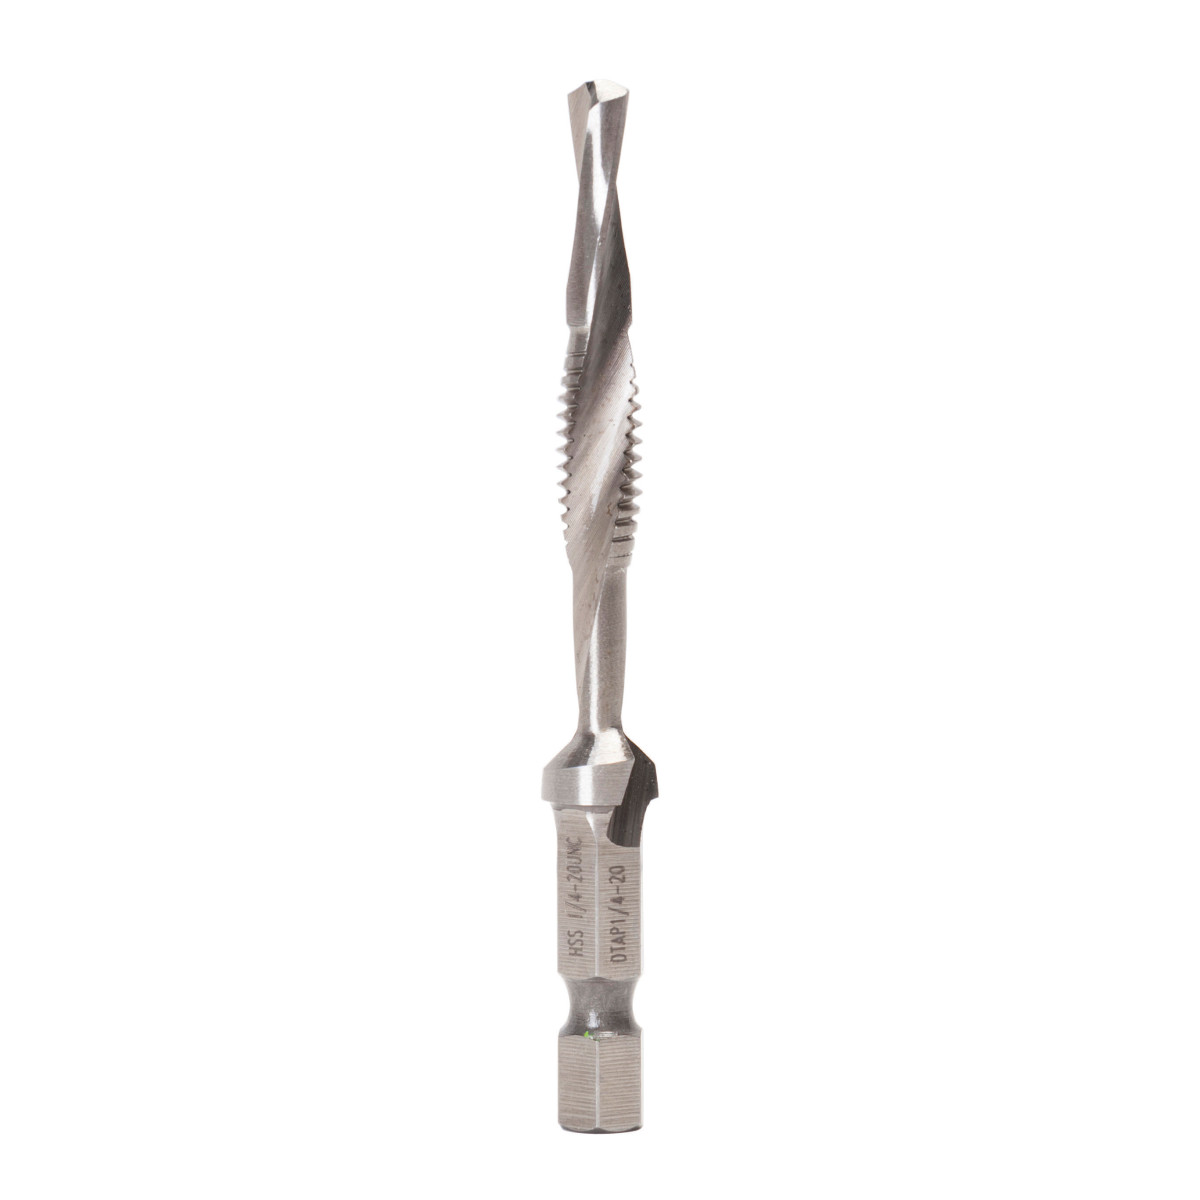 1/4-20NC Combination Drill Tap Bits.  Drill, Tap, and Countersink in one easy to use bit.  Tap holes up to 4X's faster than traditional methods.  One-piece Drill/Tap design ensures proper hole size for threaded tap size.  Available kit and individual bits in 8-32NC, 10-32NF, and 1/4-20NC thread sizes.  Constructed of hardened High Speed Steel.  Long length Drill/Tap Bits tap up to 1/2" (12.7 mm) thick material.  Split-tip drills fast and resists walking.  Back tapered beyond tap to prevent thread damage.  Quickly deburrs and counter sinks threaded hole.  Fast, secure 1/4" Quick-Change hex shank.  Quick-Change adapter included in Standard Length, Long Length, and Metric Drill/Tap Kits.  For best results, use Greenlee cutting oil with all Drill/Tap bits.